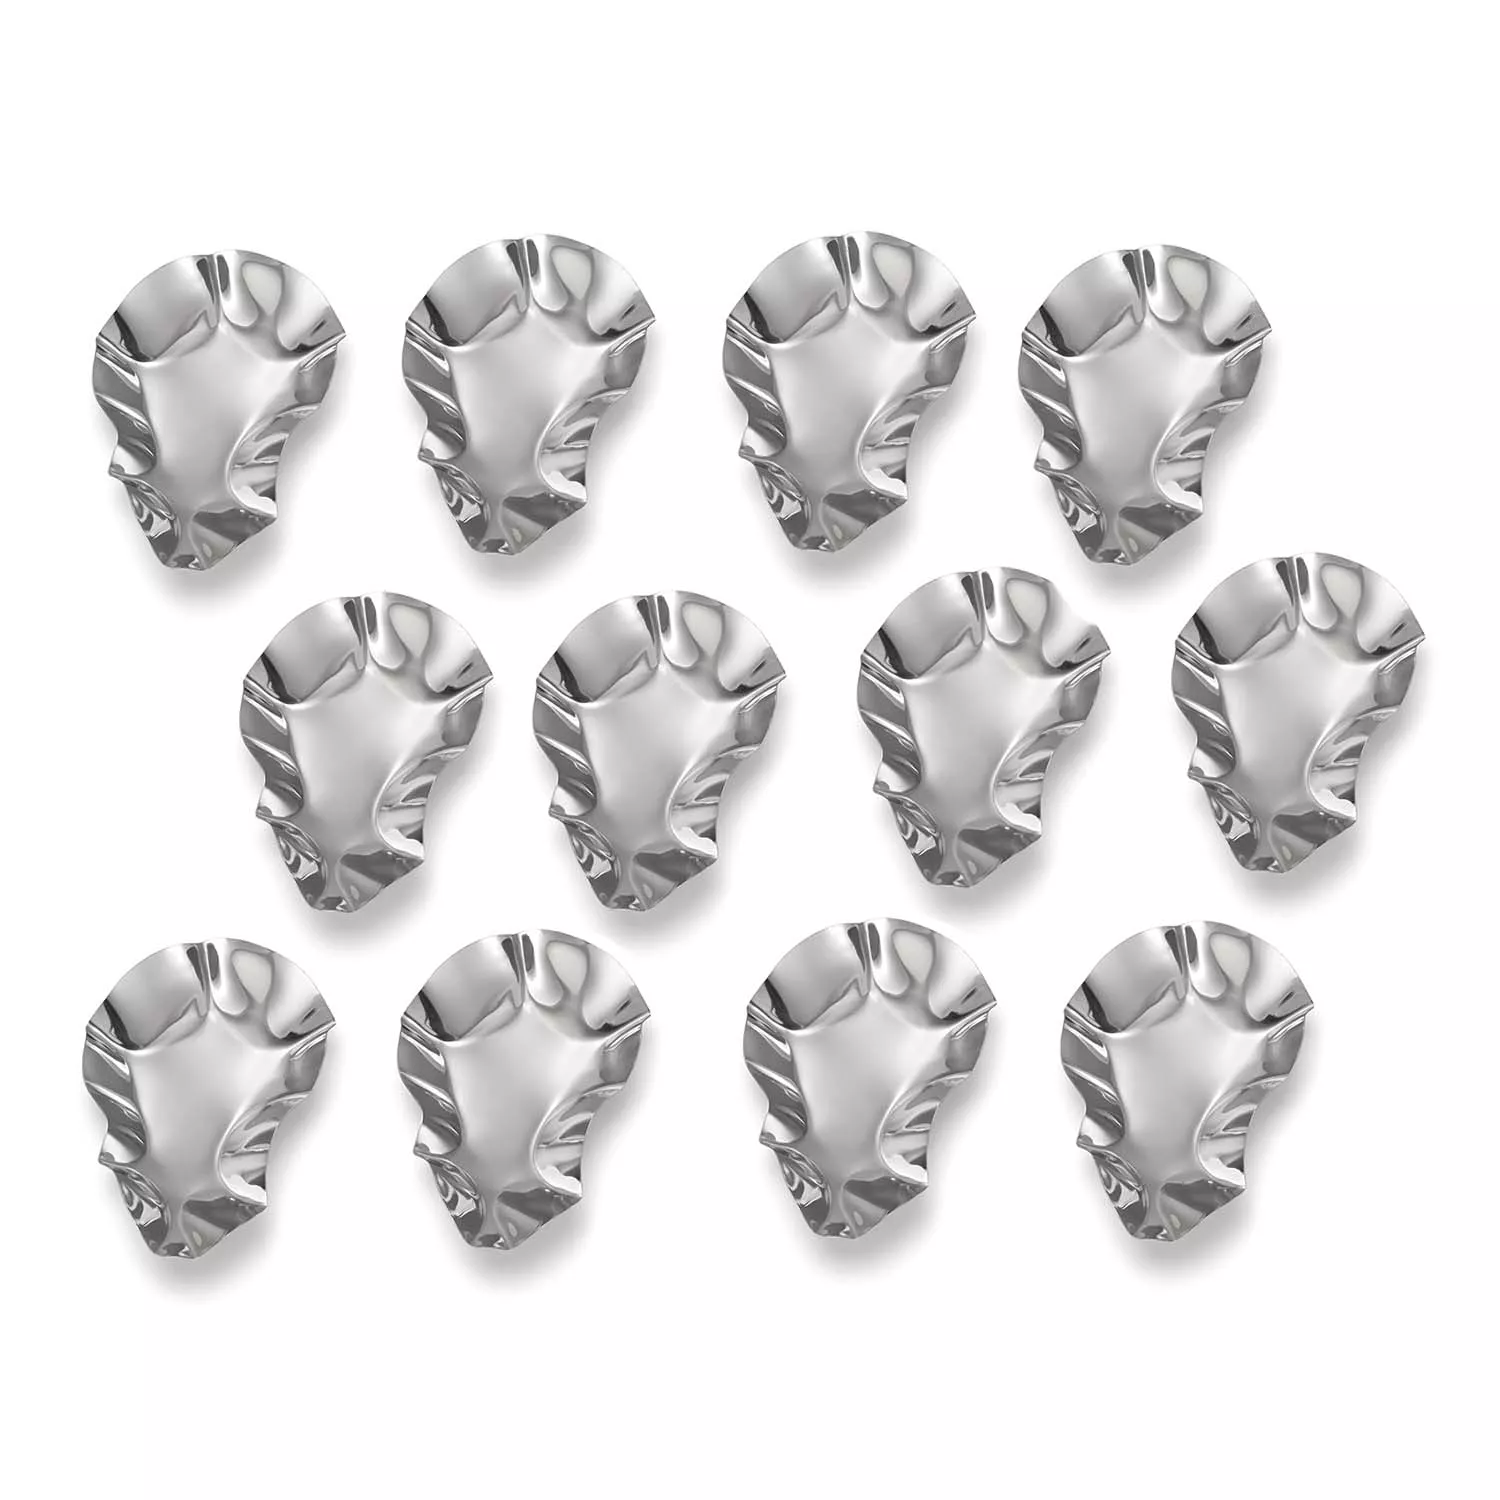 Stainless Steel Oyster Shells, 12 pack